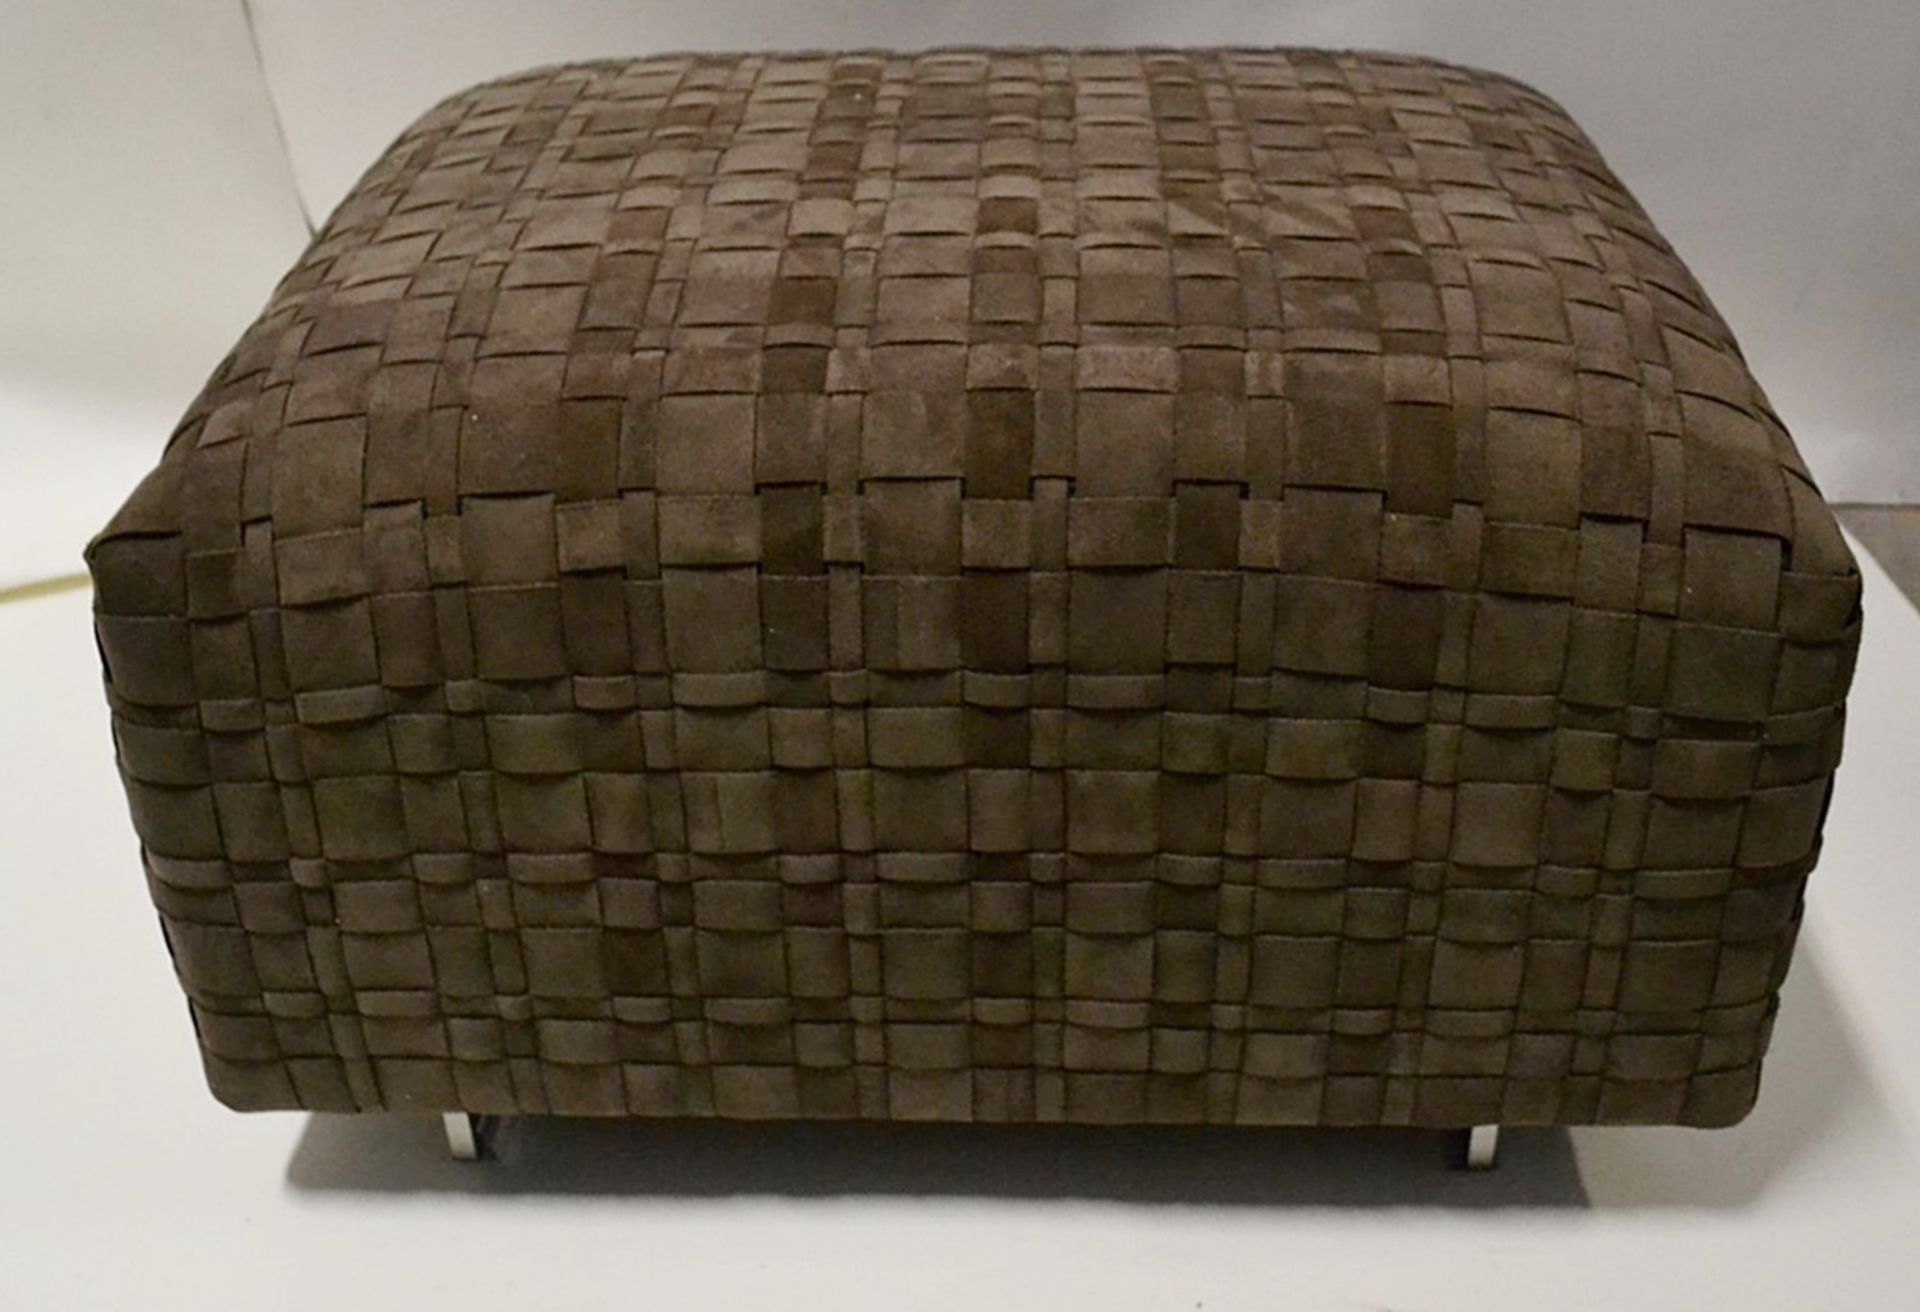 1 x Flexform Bangkok Ottoman - Elegantly Upholstered In Woven Strips of Brown Suede Leather - - Image 3 of 8